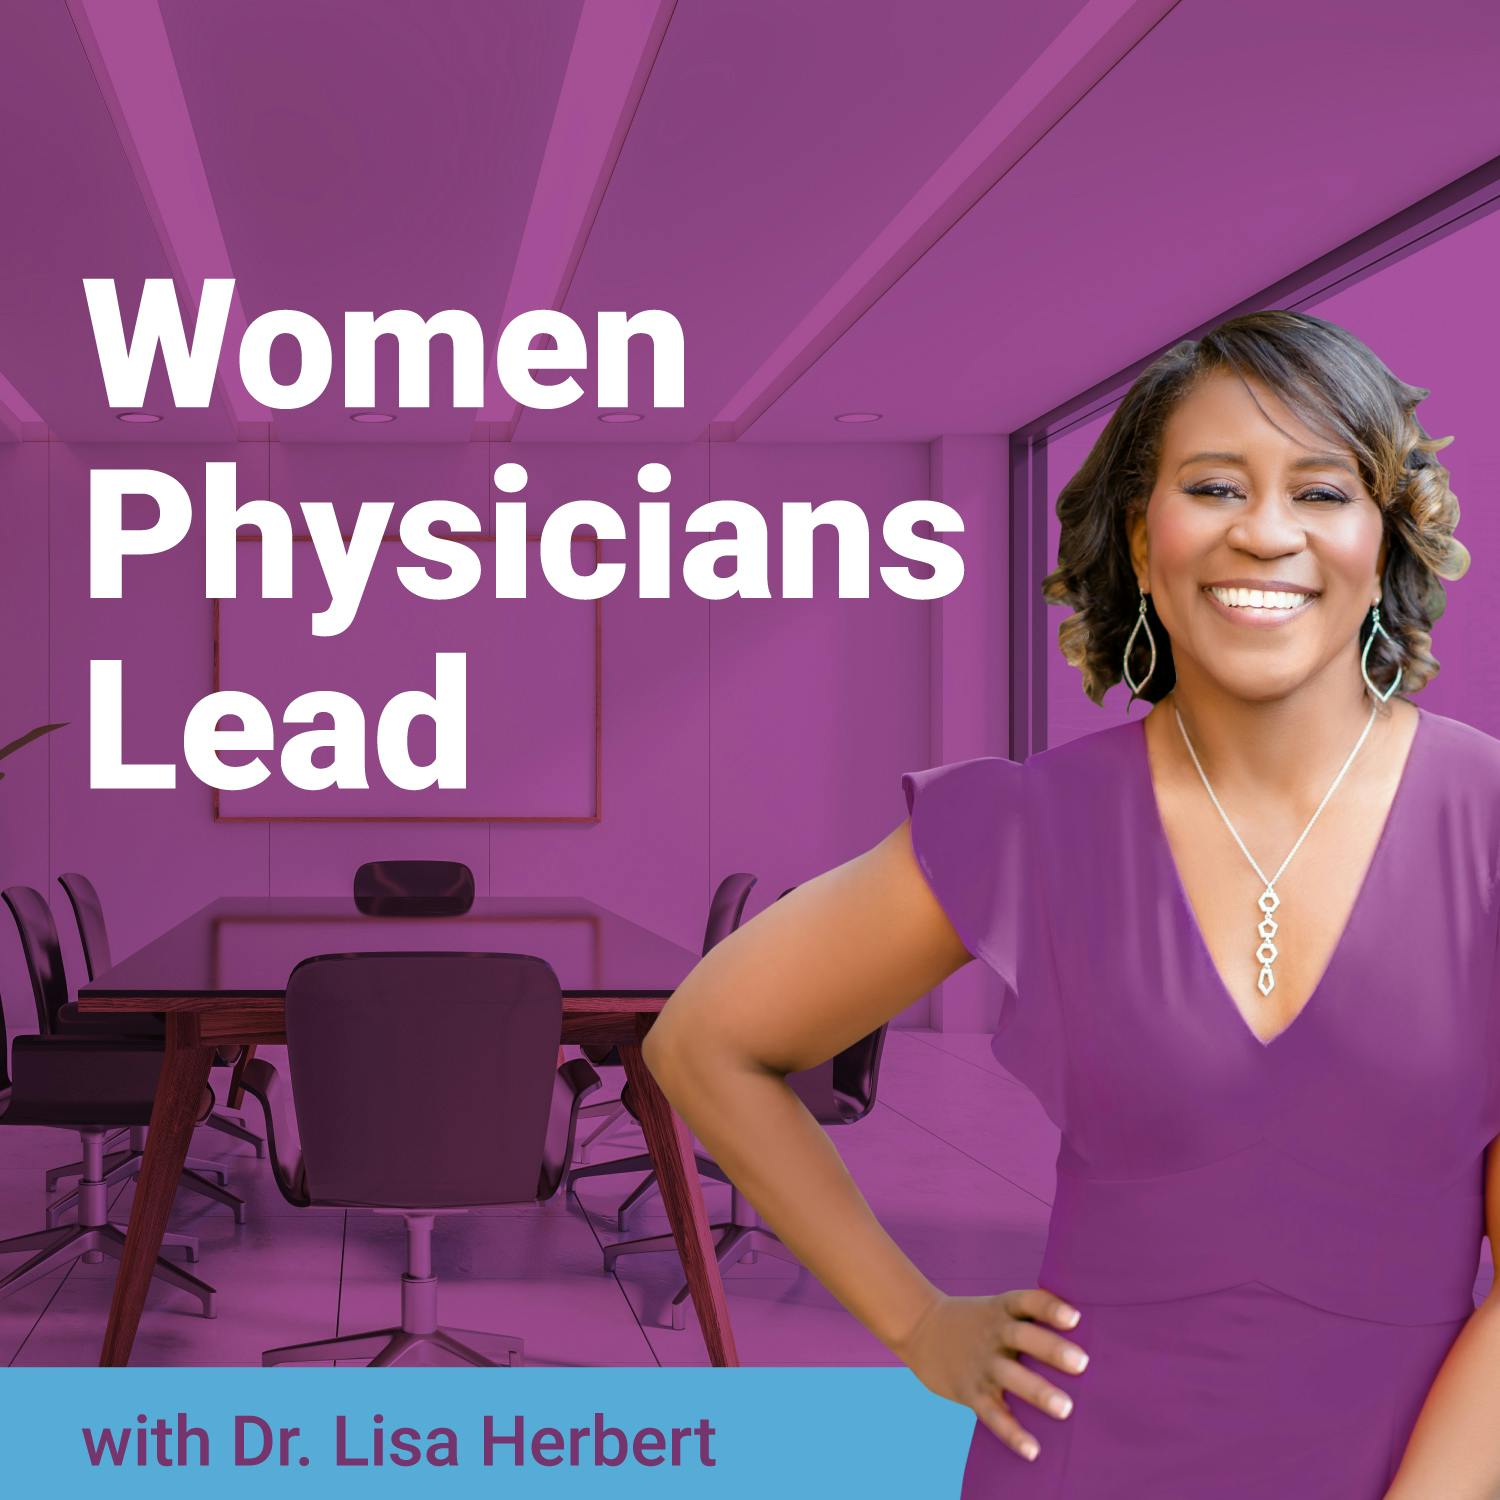 Dr. Nicole Rochester: Diversity and Inclusion in Healthcare Leadership